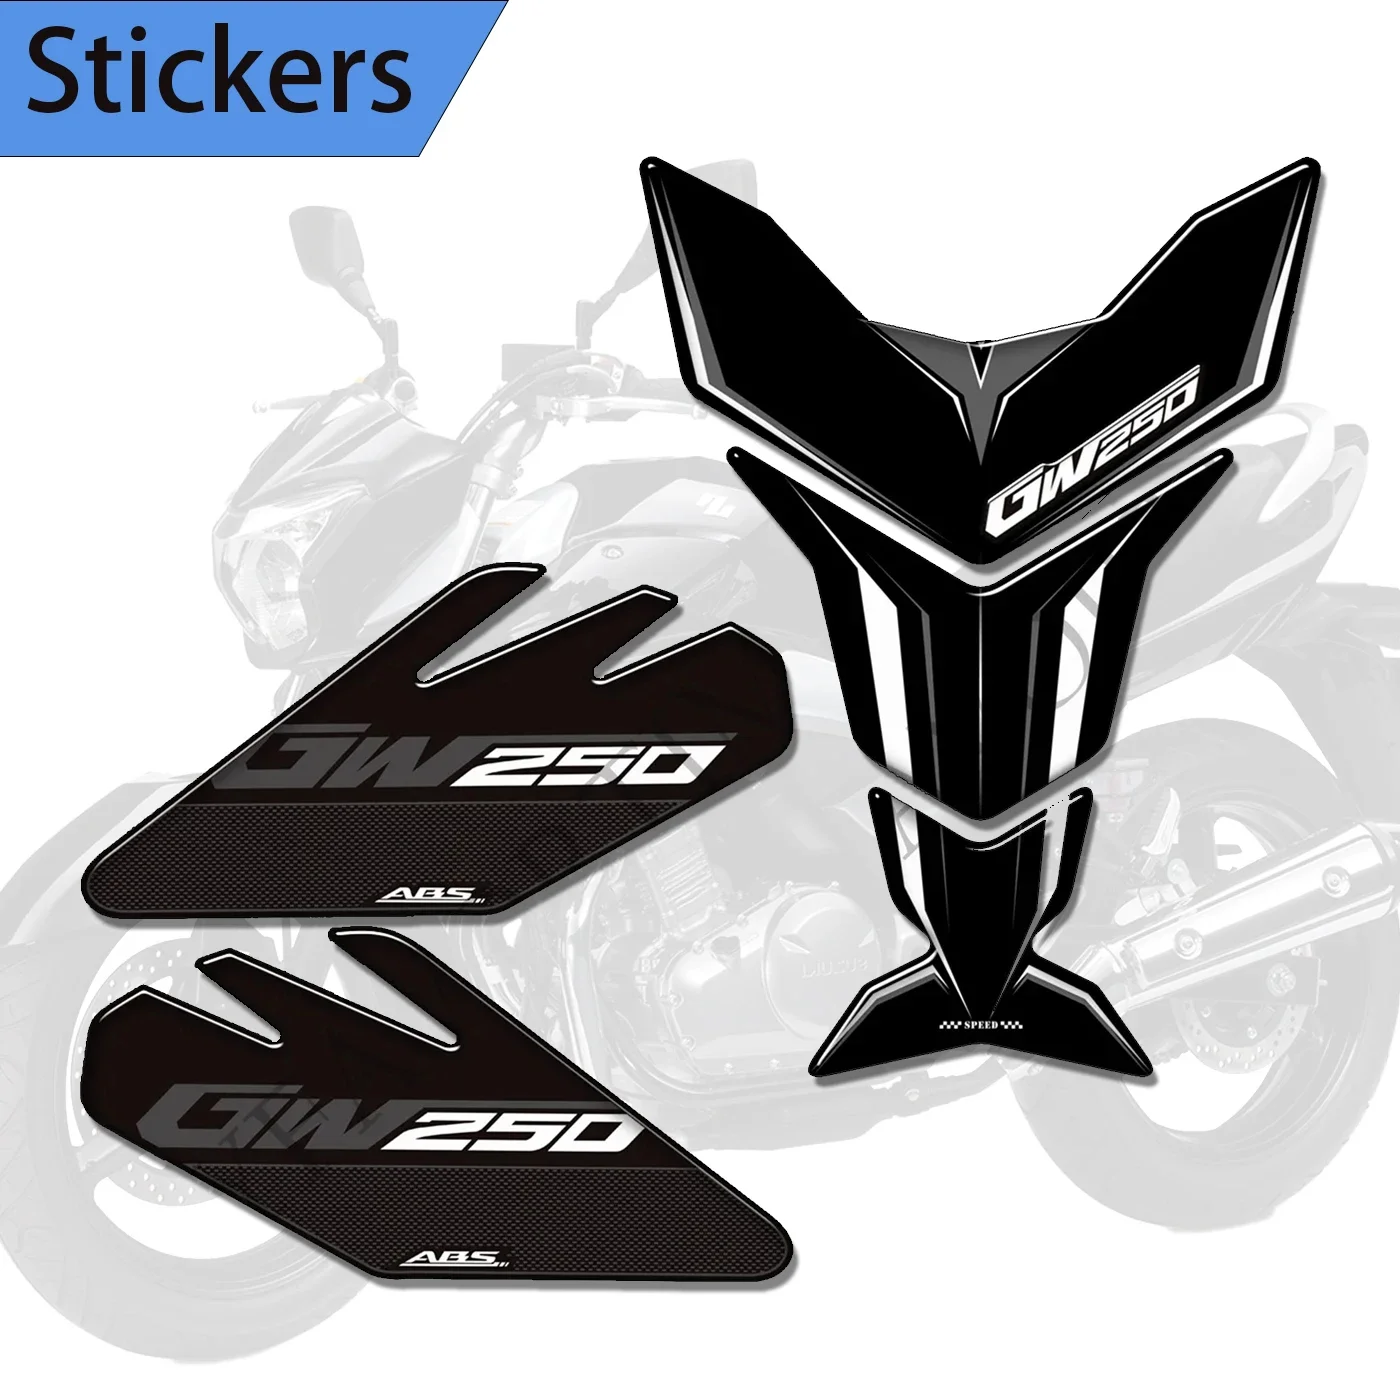 Motorcycle Decals For Suzuki Inazuma GW250 GW 250 Tank Pad Side Grips Gas Fuel Oil Kit Knee Protection for suzuki inazuma gw250 gw 250 motorcycle 3d stickers tank pad side grips gas fuel oil kit knee decals protection